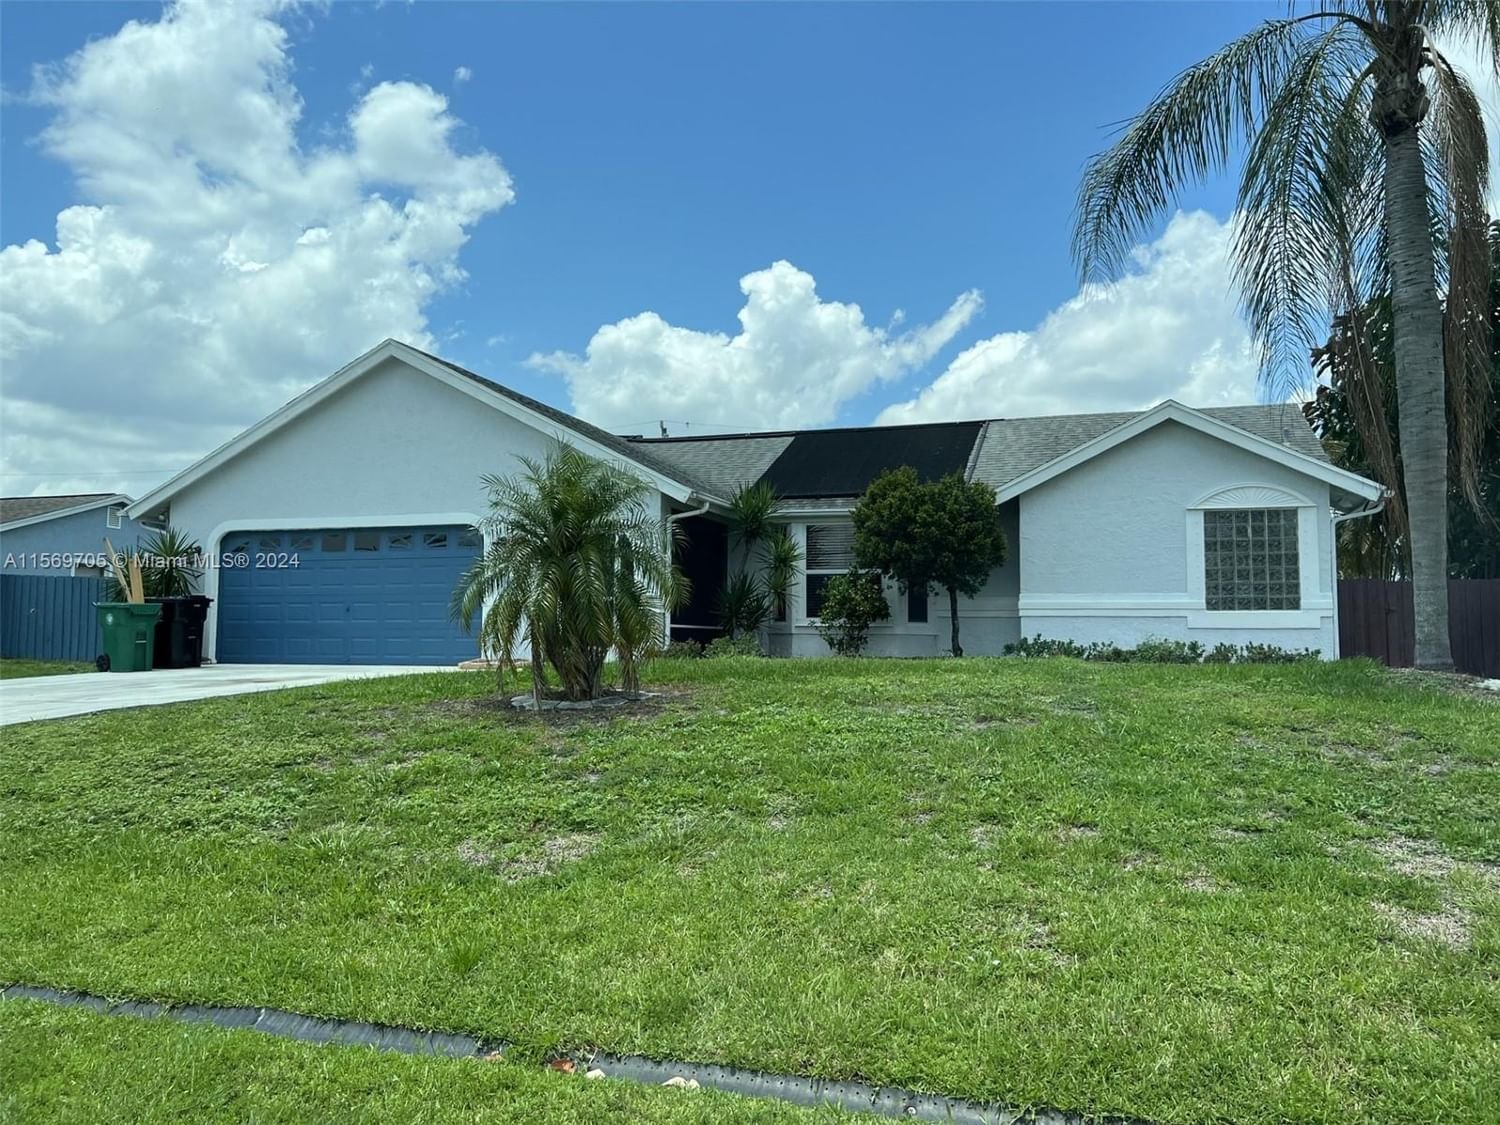 Real estate property located at 863 Mccomb Ave, St Lucie County, PORT ST LUCIE SECTION 21, Port St. Lucie, FL